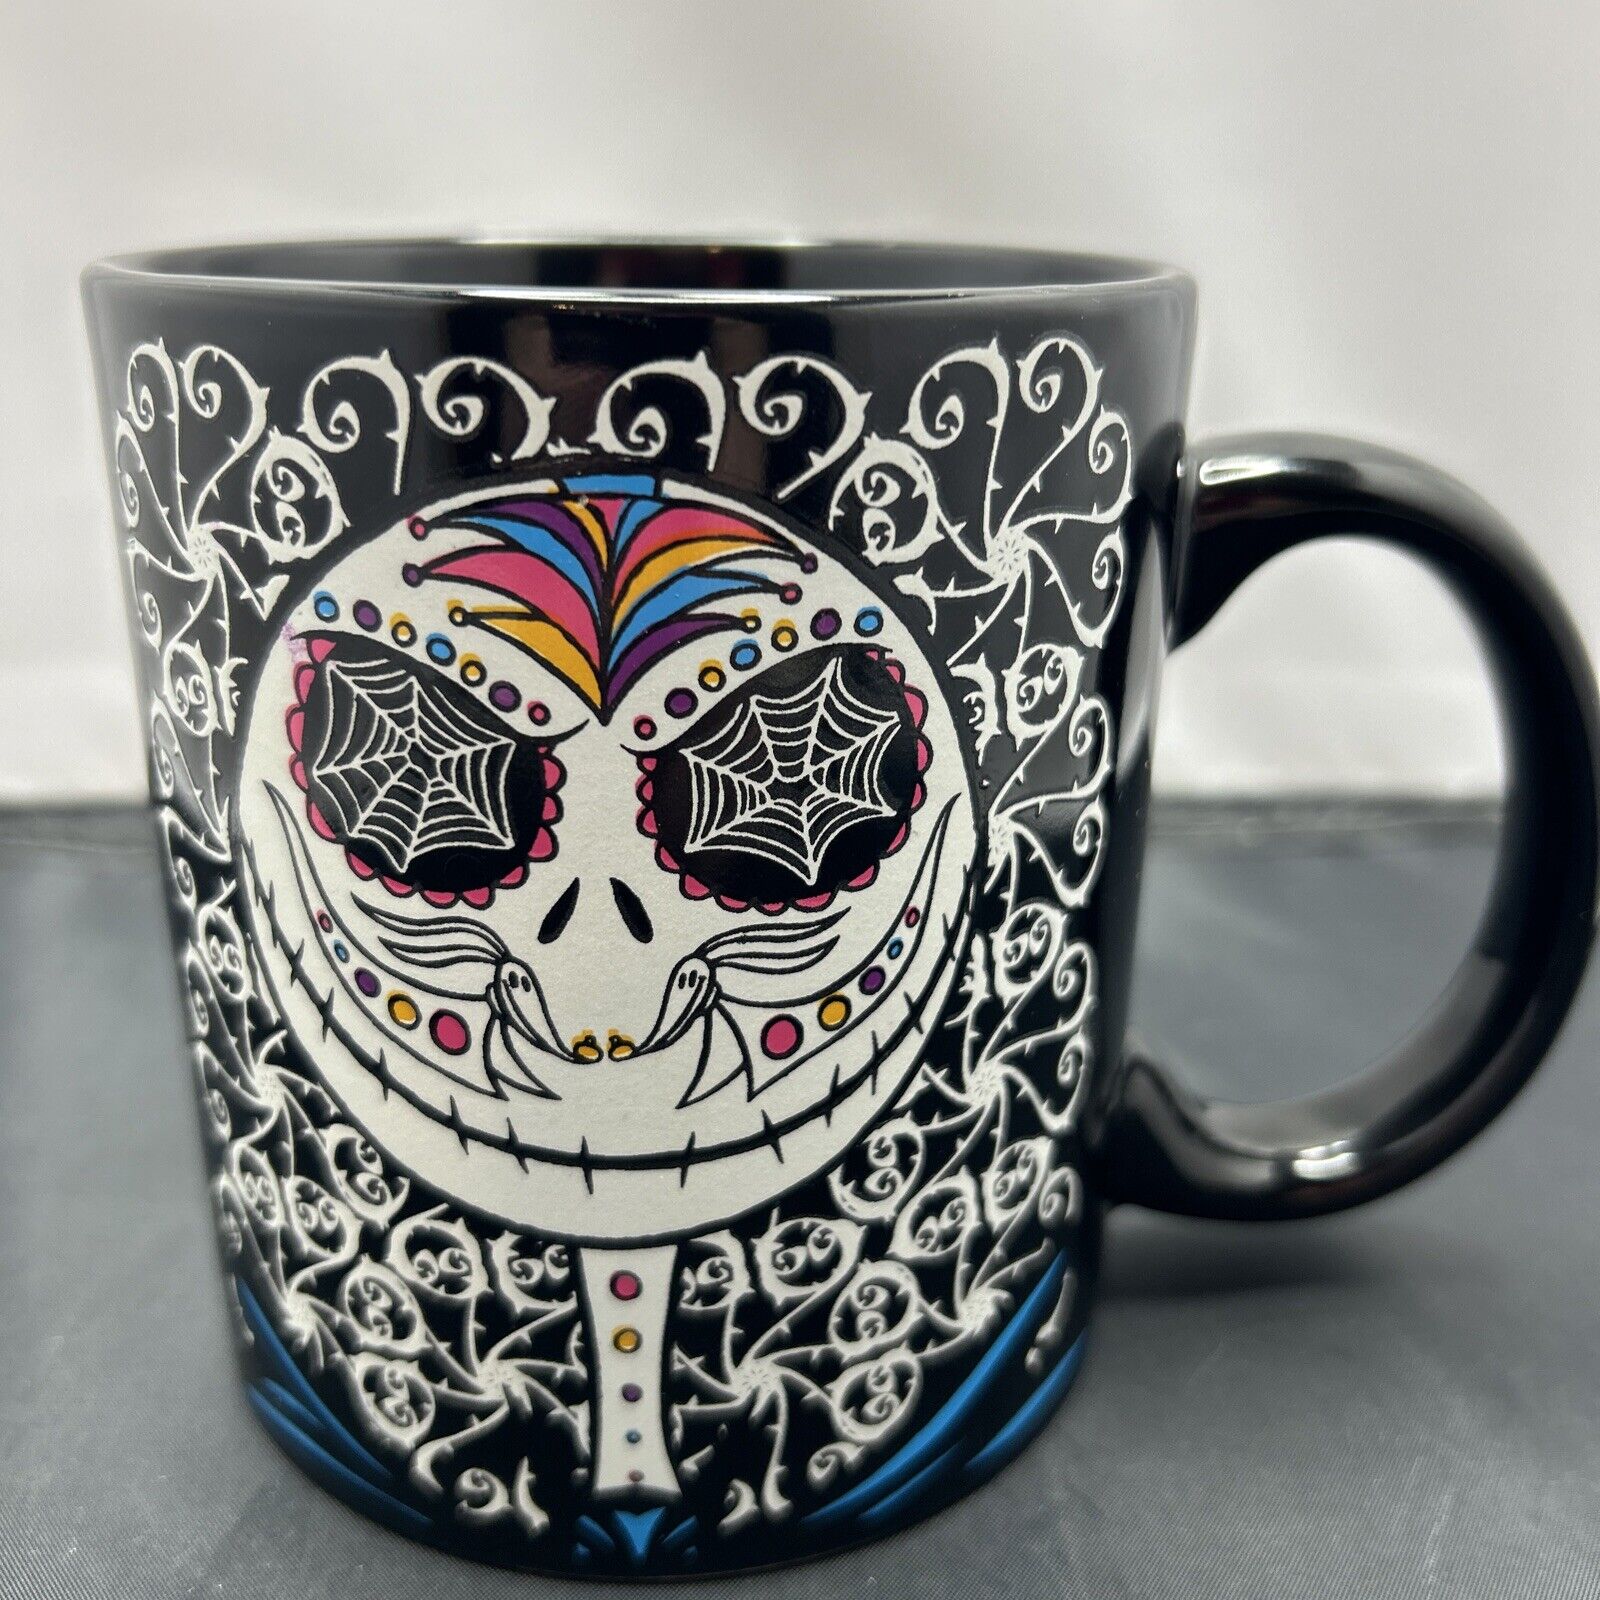 NEW Jack & Sally Nightmare Before Christmas Day of the Dead Glow-in-the-Dark Mug